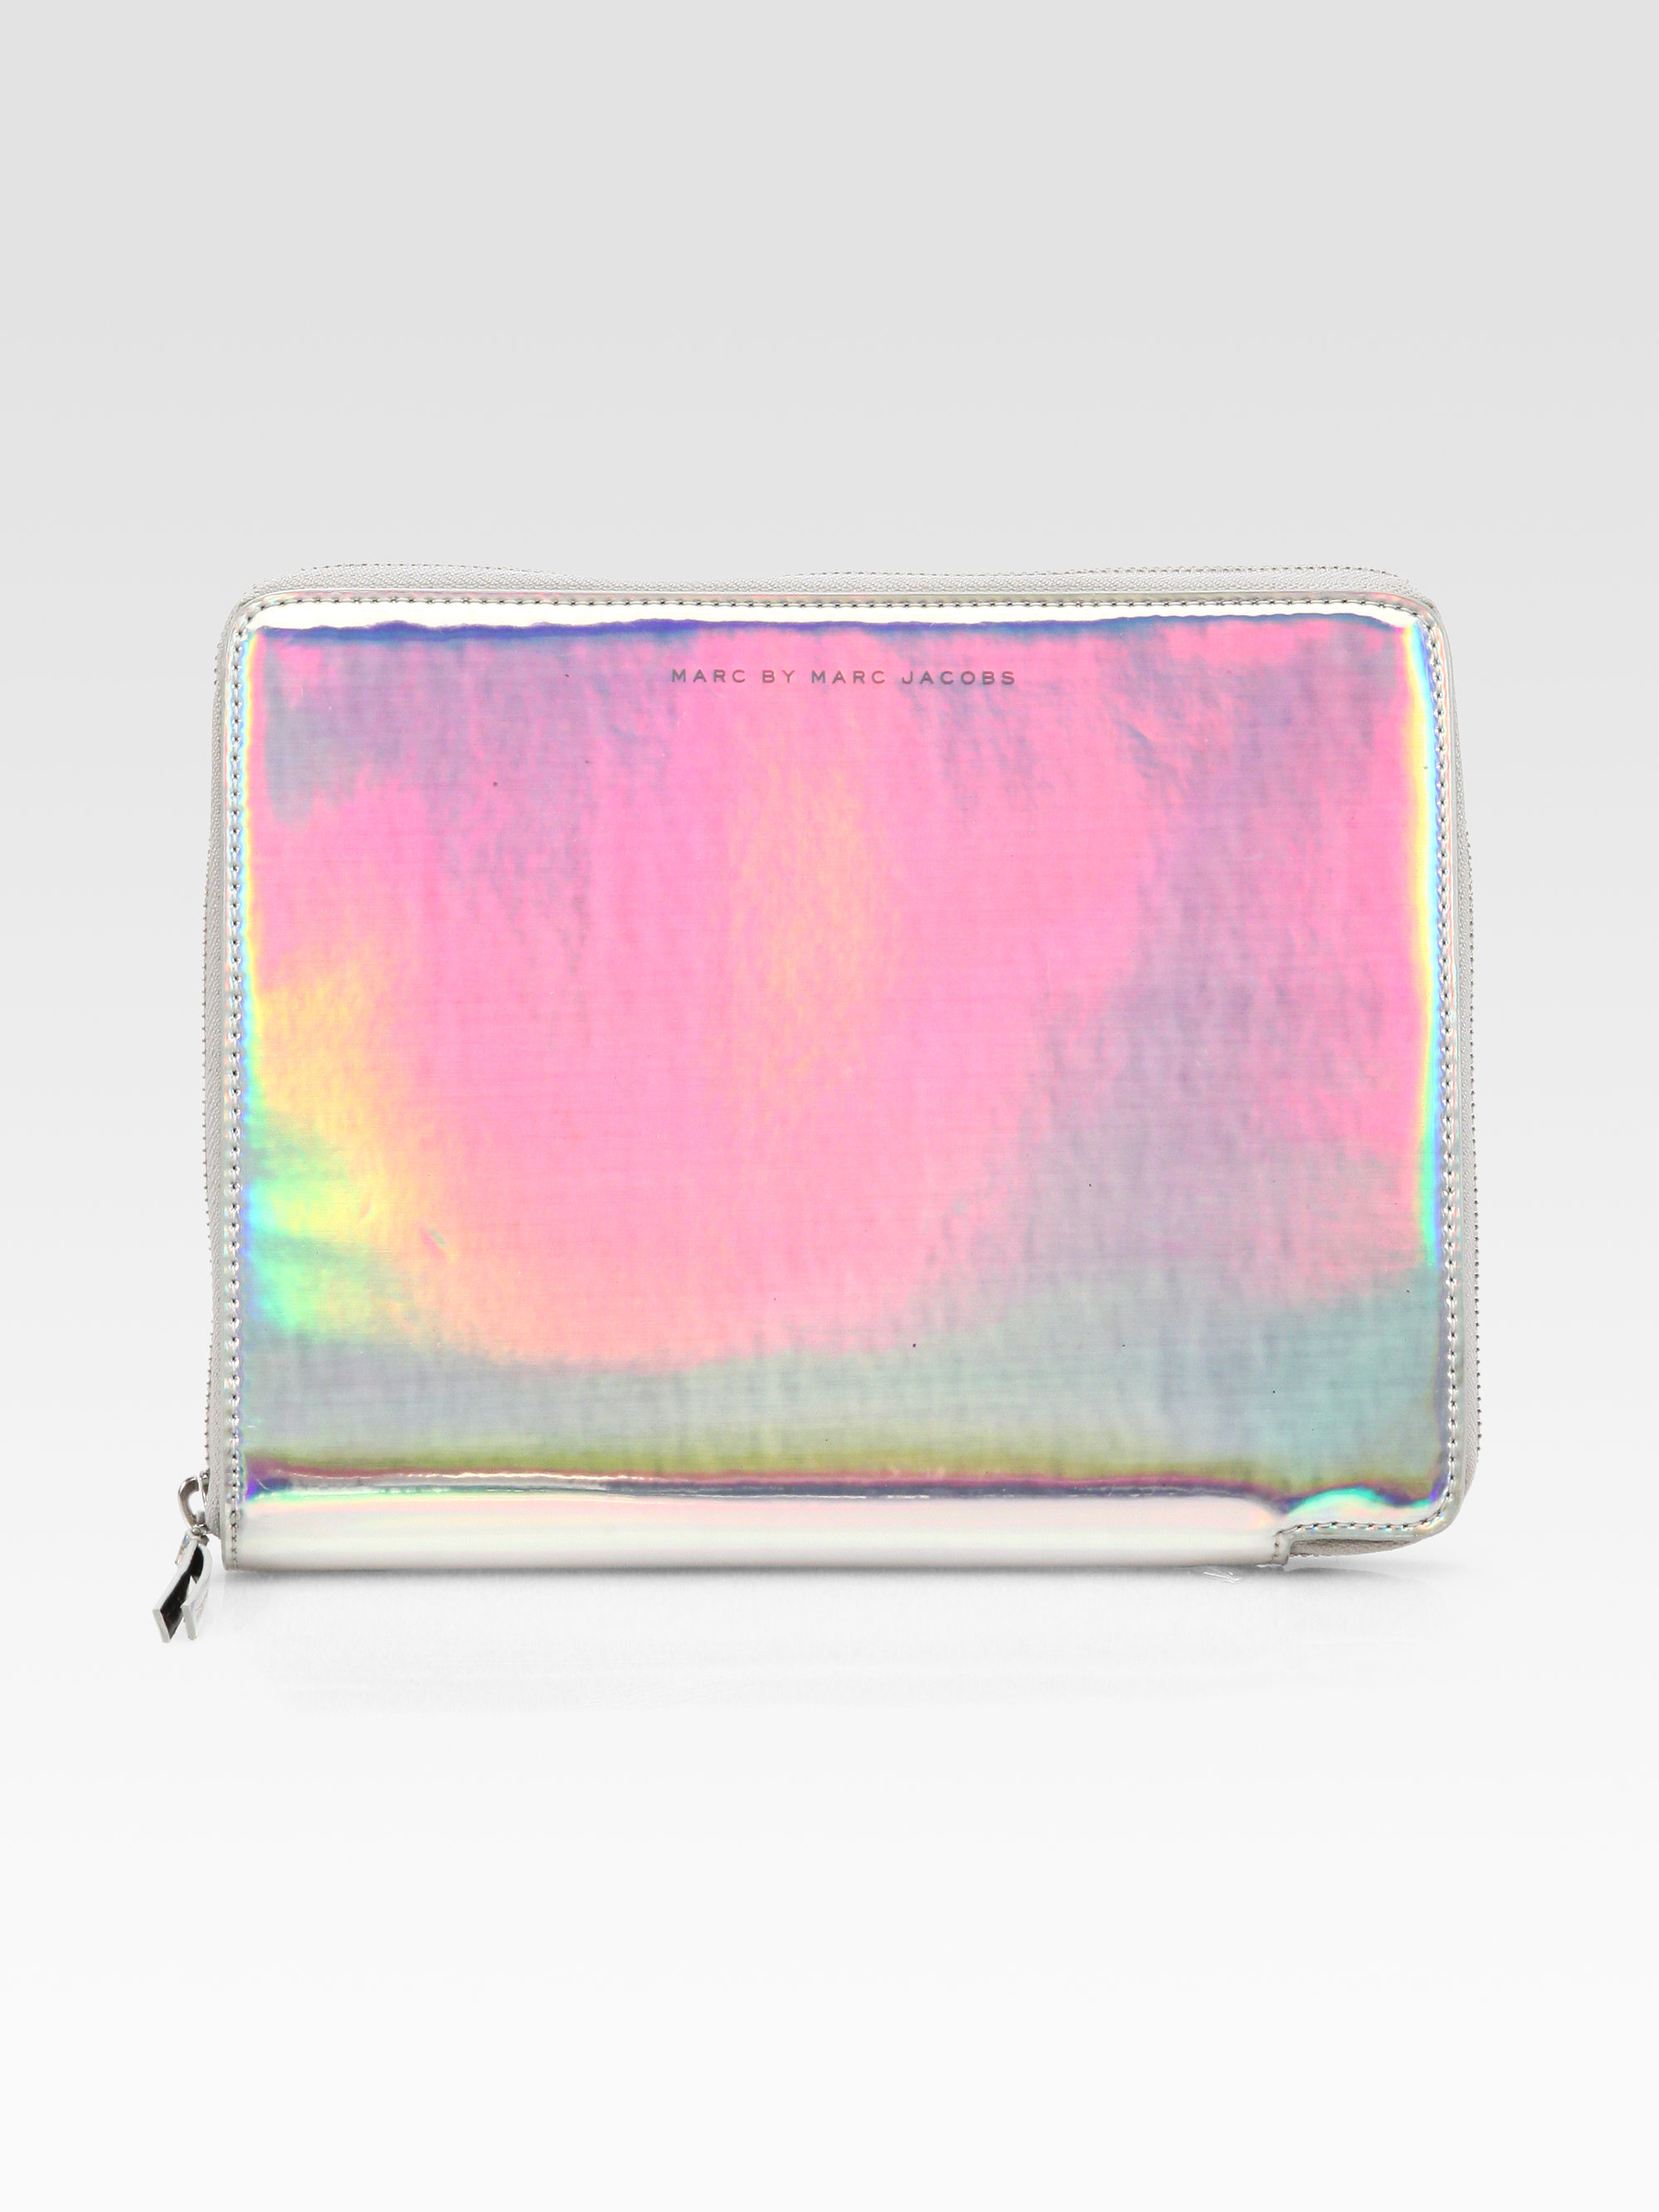 Lyst - Marc By Marc Jacobs Techno Holographic Leather Tablet Case in Metallic2000 x 2667